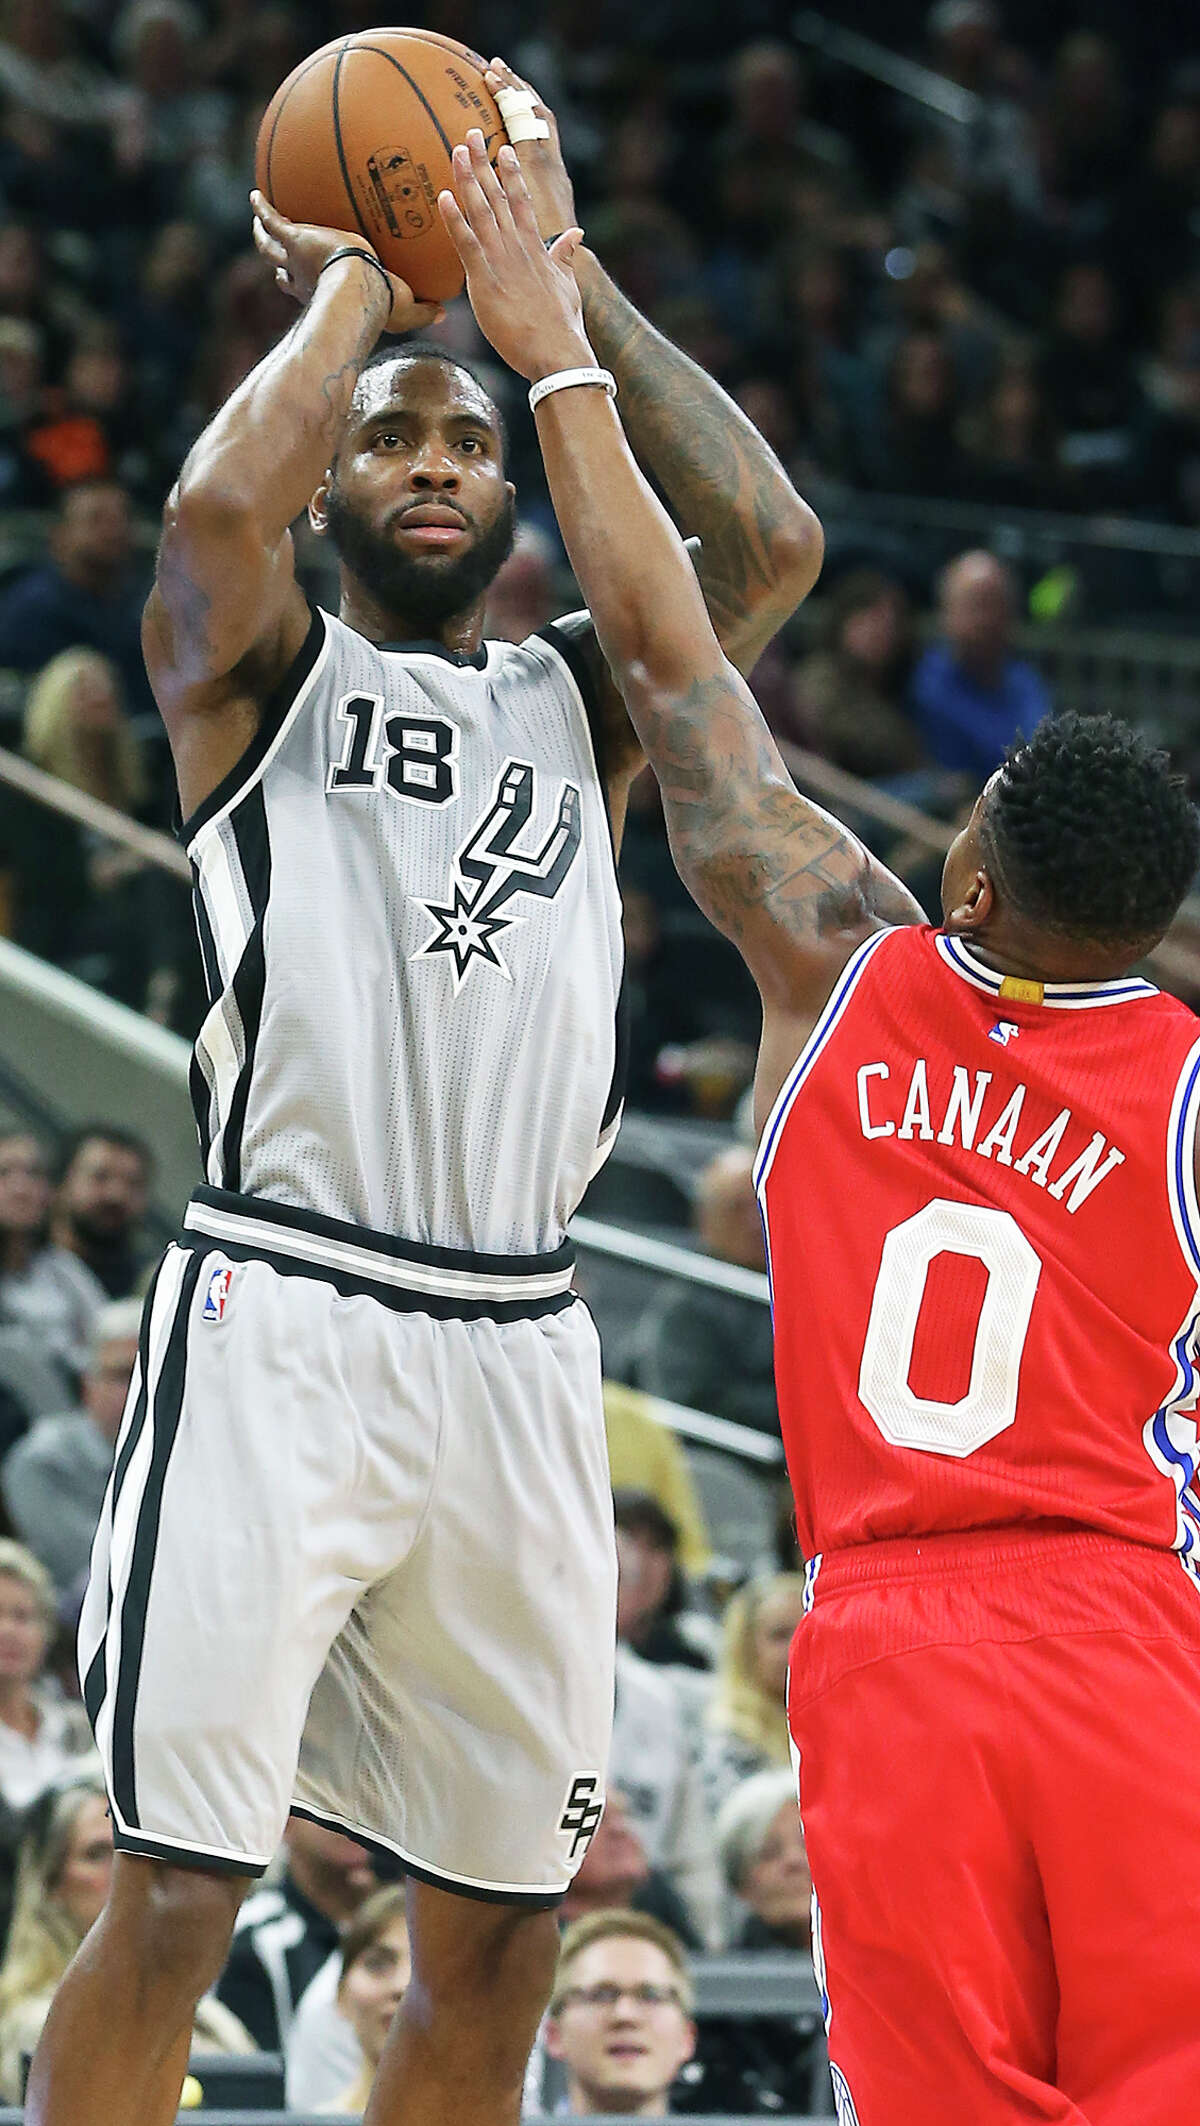 Spurs’ Rasual Butler puts up a jumper against the 76ers’ Isaiah Canaan at the AT&T Center on Nov. 14, 2015.